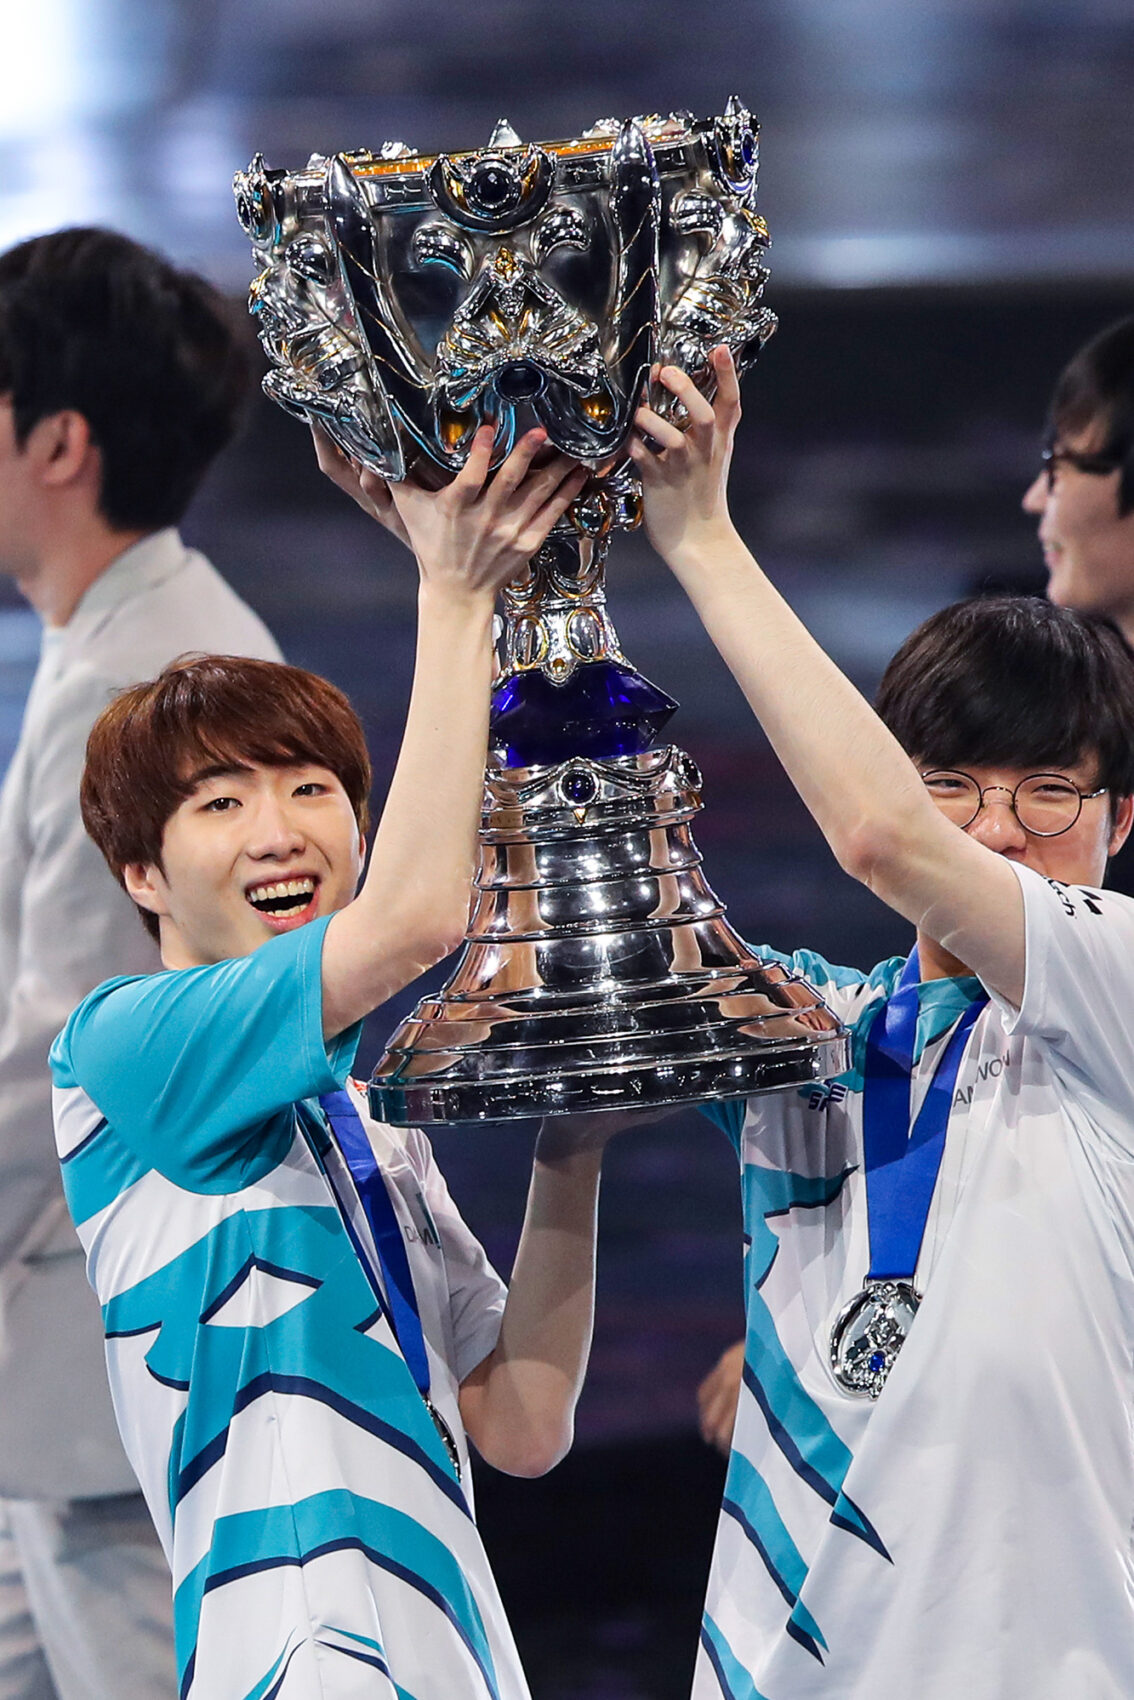 A Closer Look At LoL's Summoner's Cup